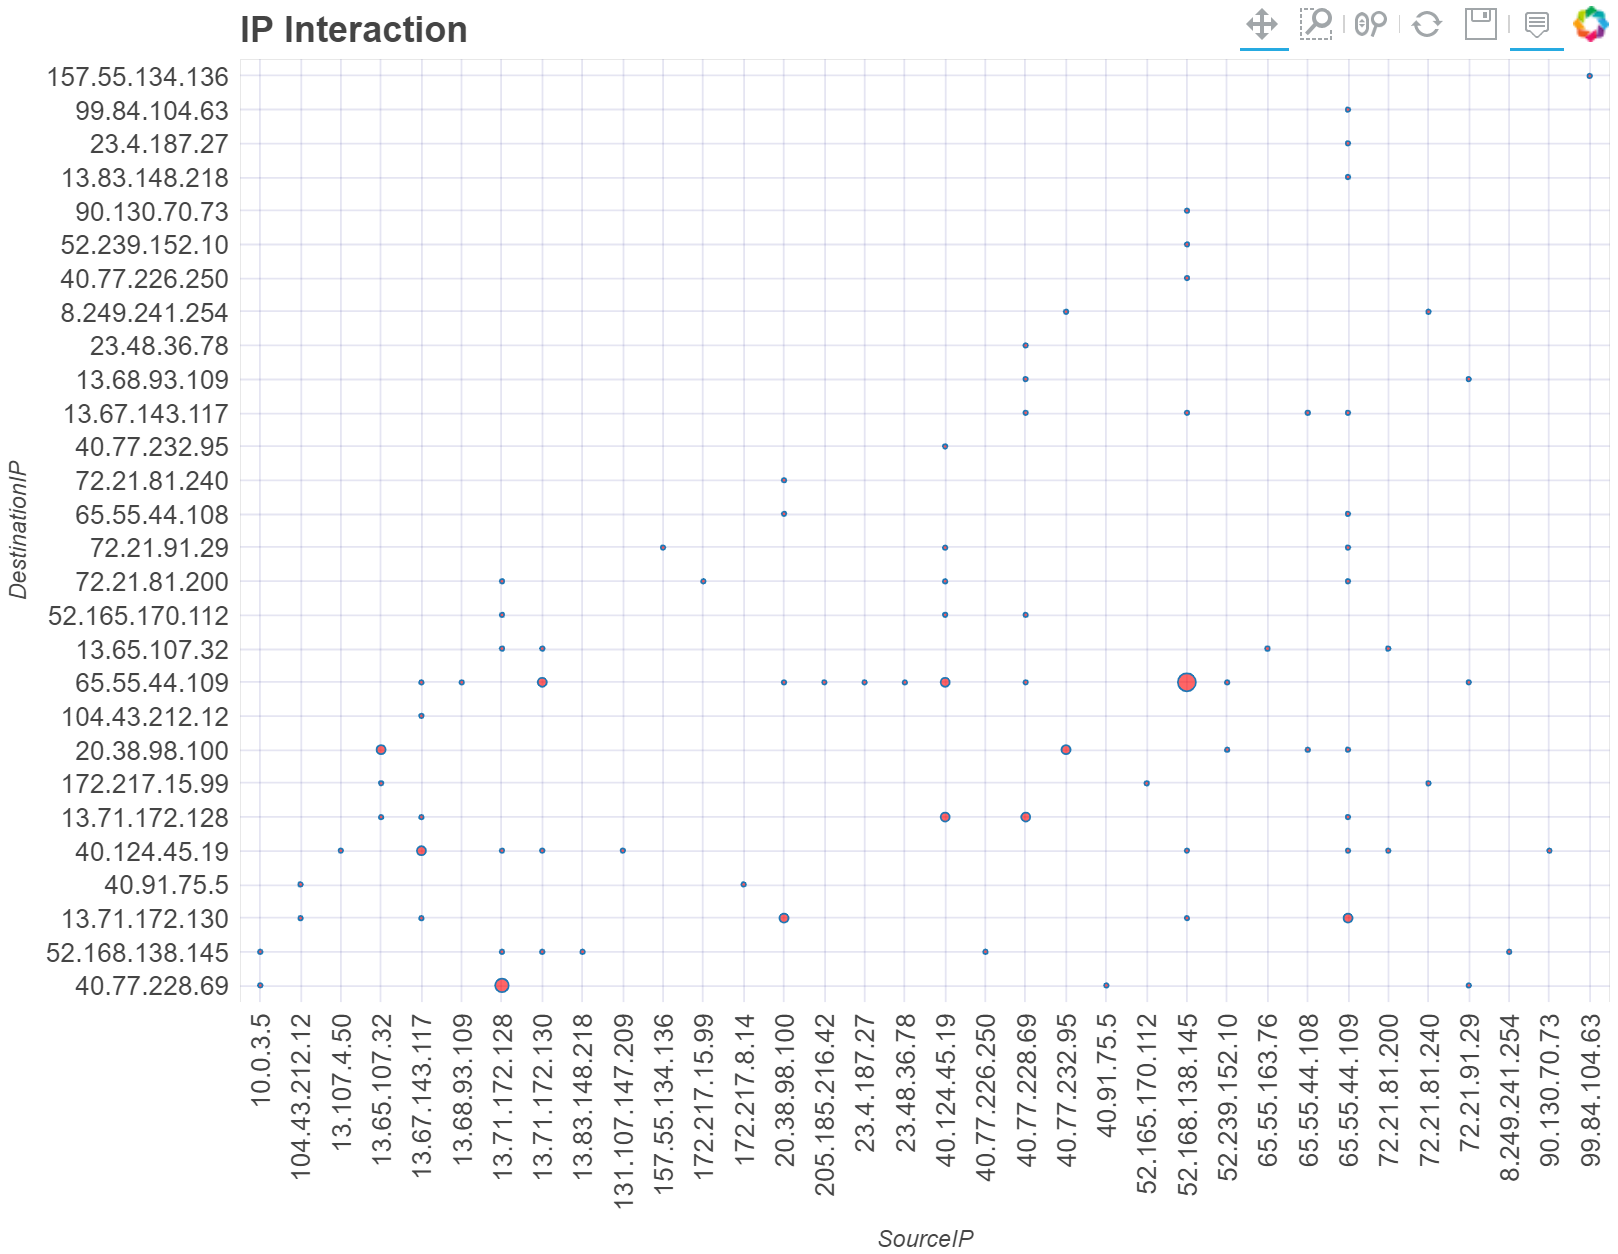 Plot of simple count of interactions between source and destination IP addresses